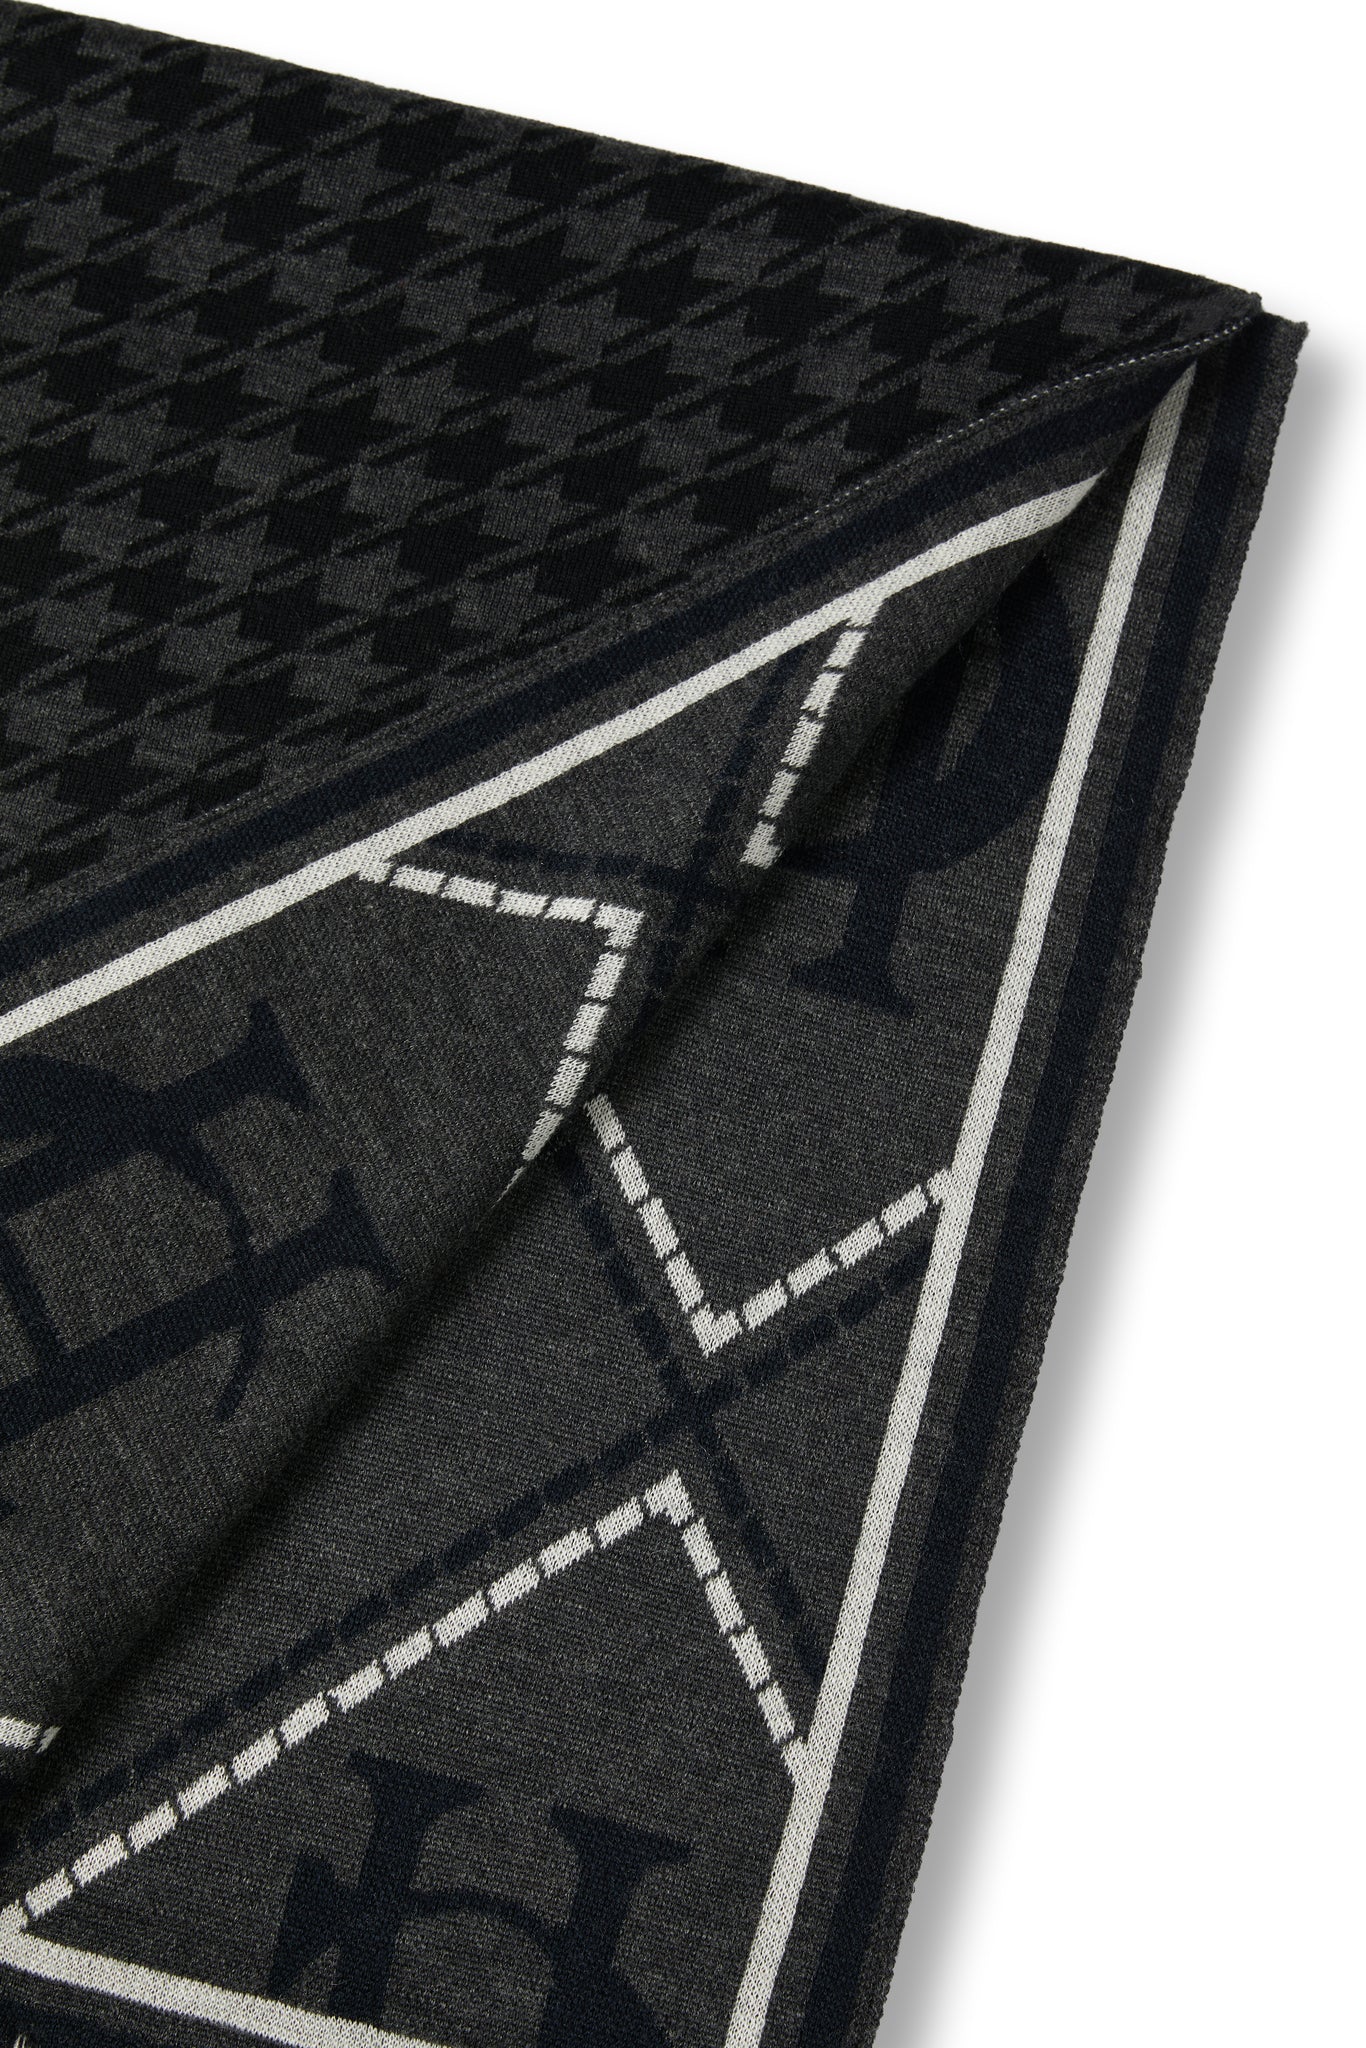 Reversible Monogram Scarf (Charcoal Houndstooth)